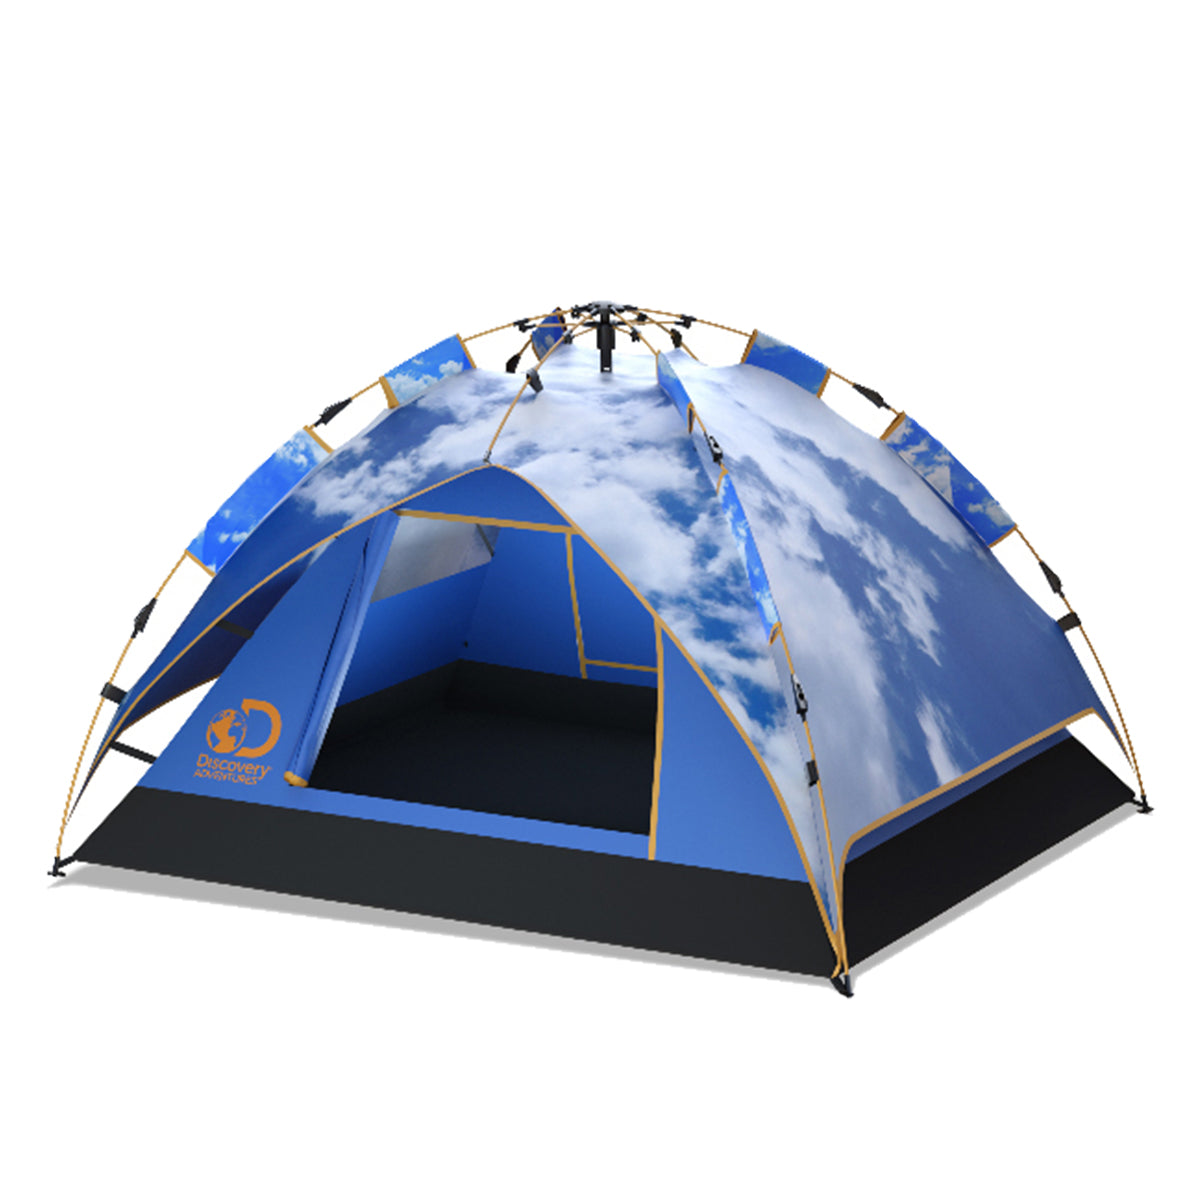 INSTANT POP UP TENTS fOR CAMPING, 2-3 PERSON CAMPING TENT AUTOMATIC 60 S SETUP TENT,WATERPROOF FAMILY TENT FOR HIKING BACKPACKING